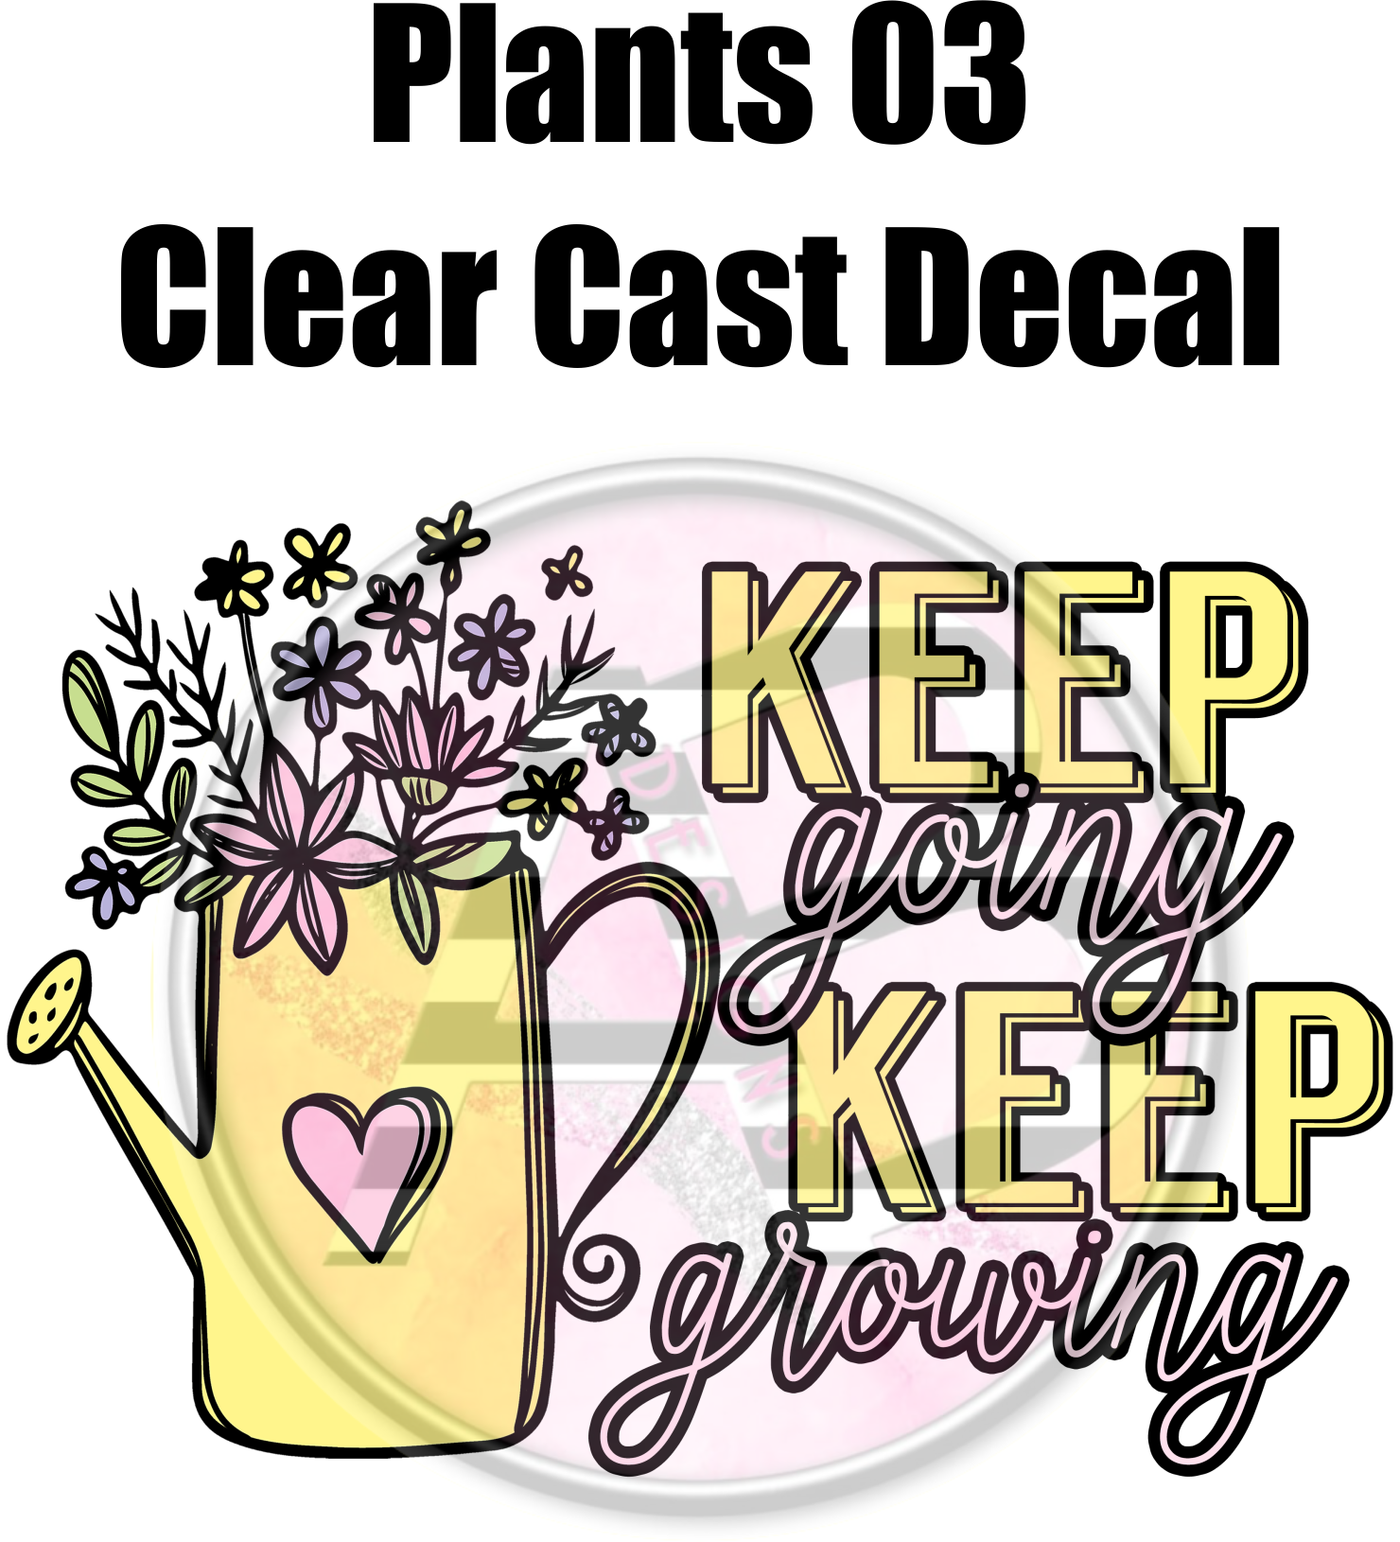 Plants 03 - Clear Cast Decal - 68